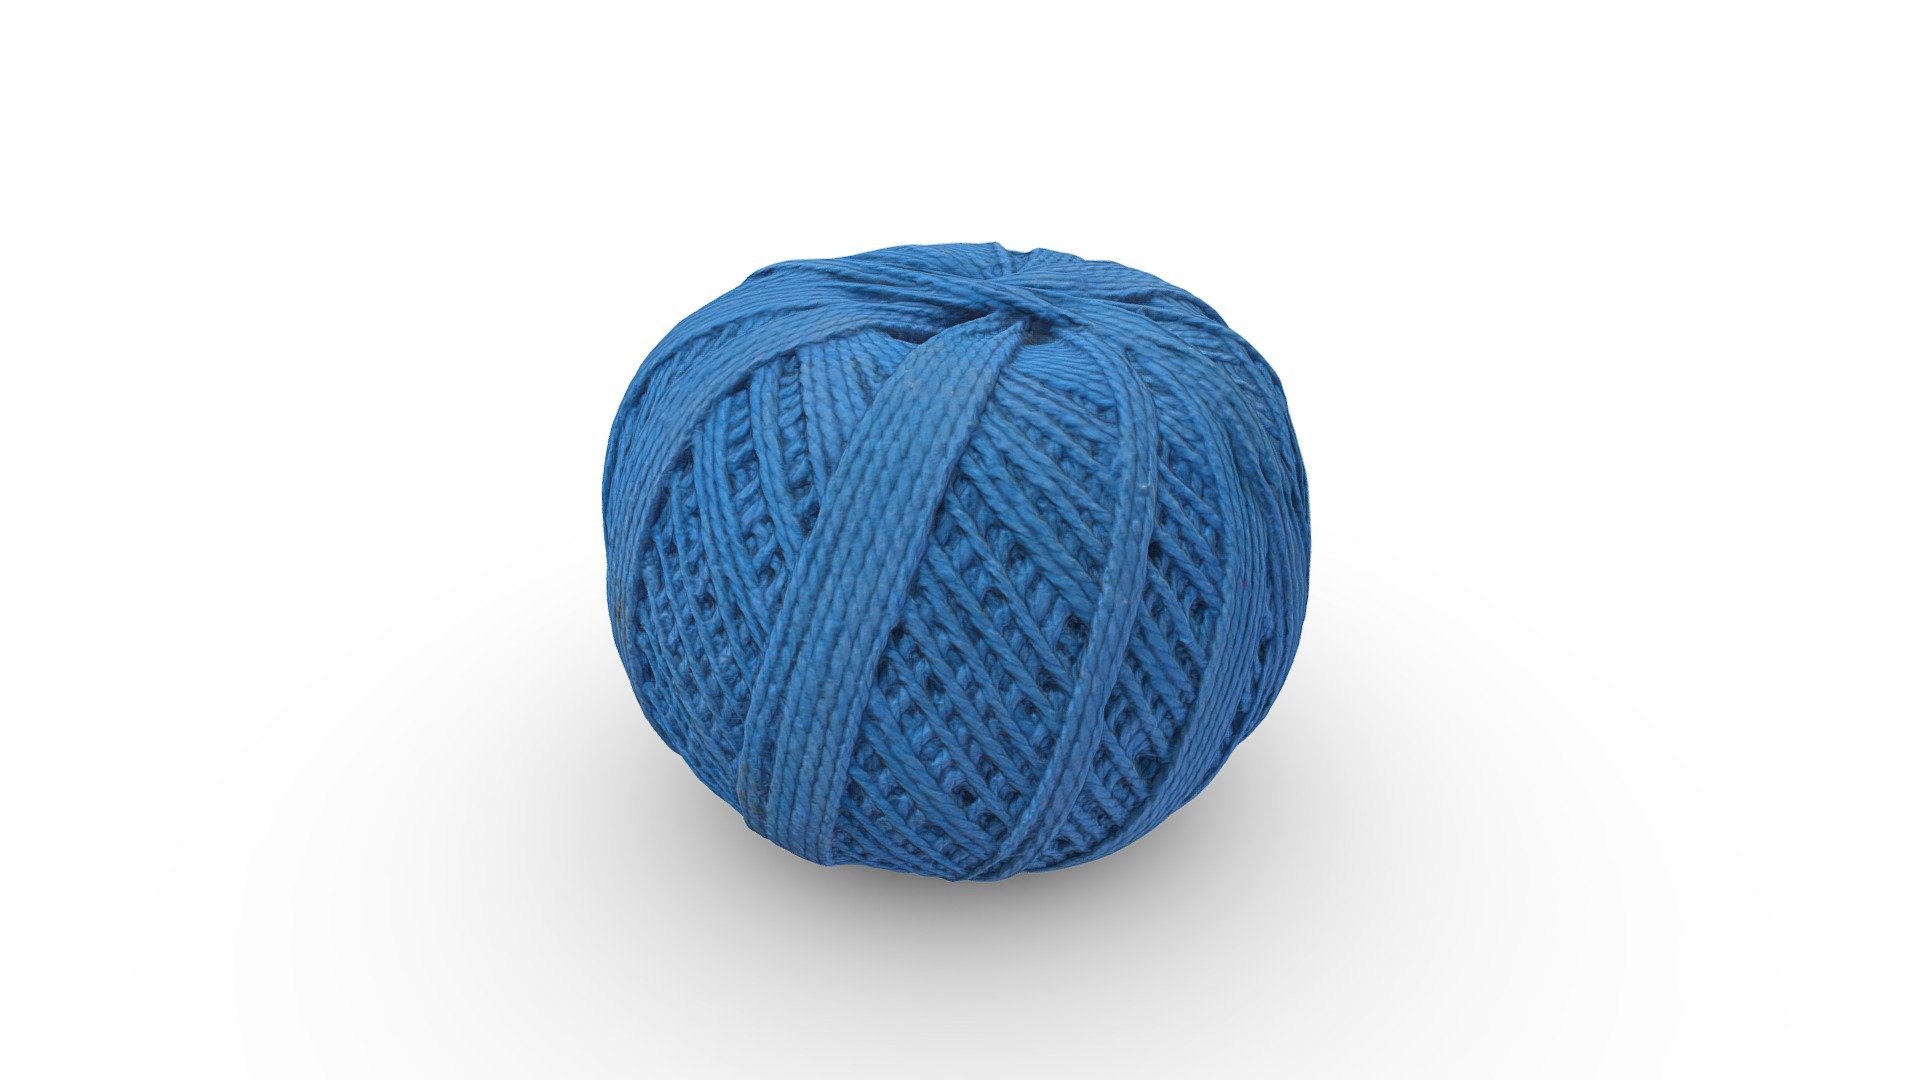 High-poly blue ball of thread photogrammetry scan. PBR texture maps 4096x4096 px. resolution for metallic or specular workflow. Scan from real thread, high-poly 3D model, 4K resolution textures.

Additional file contains low-poly 3d model version, game-ready in real time 3d model